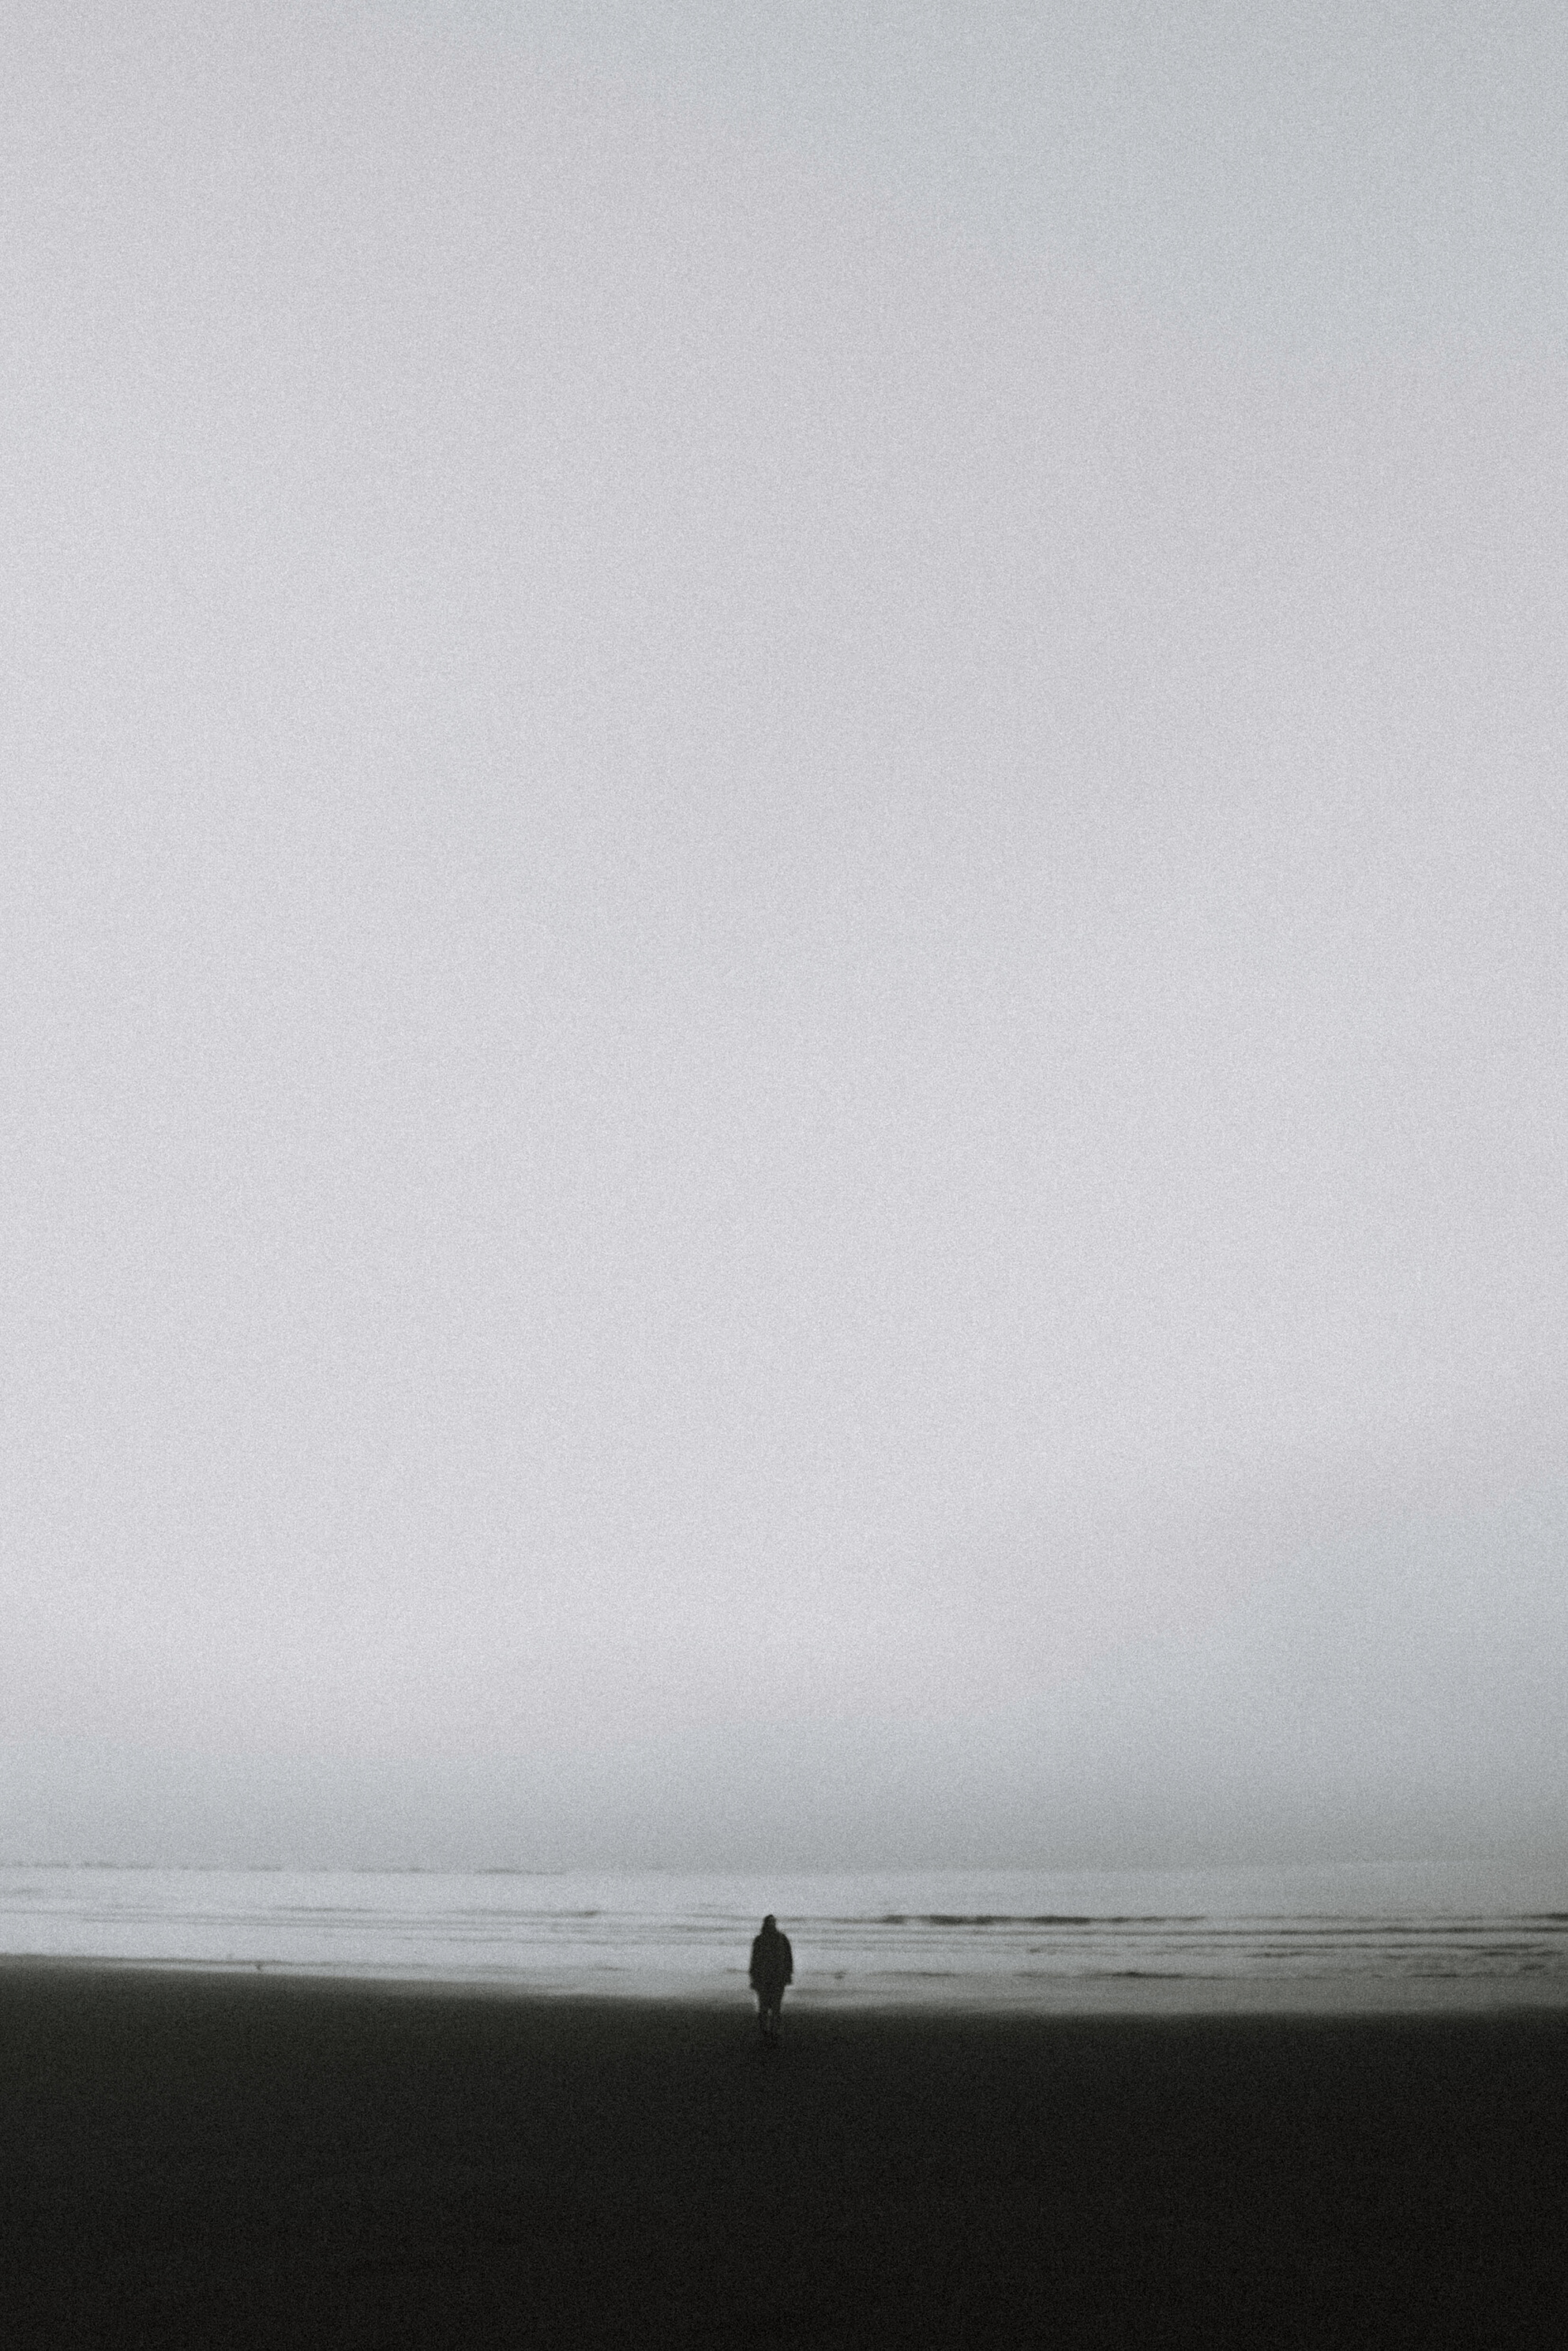 Lonely person standing on seashore